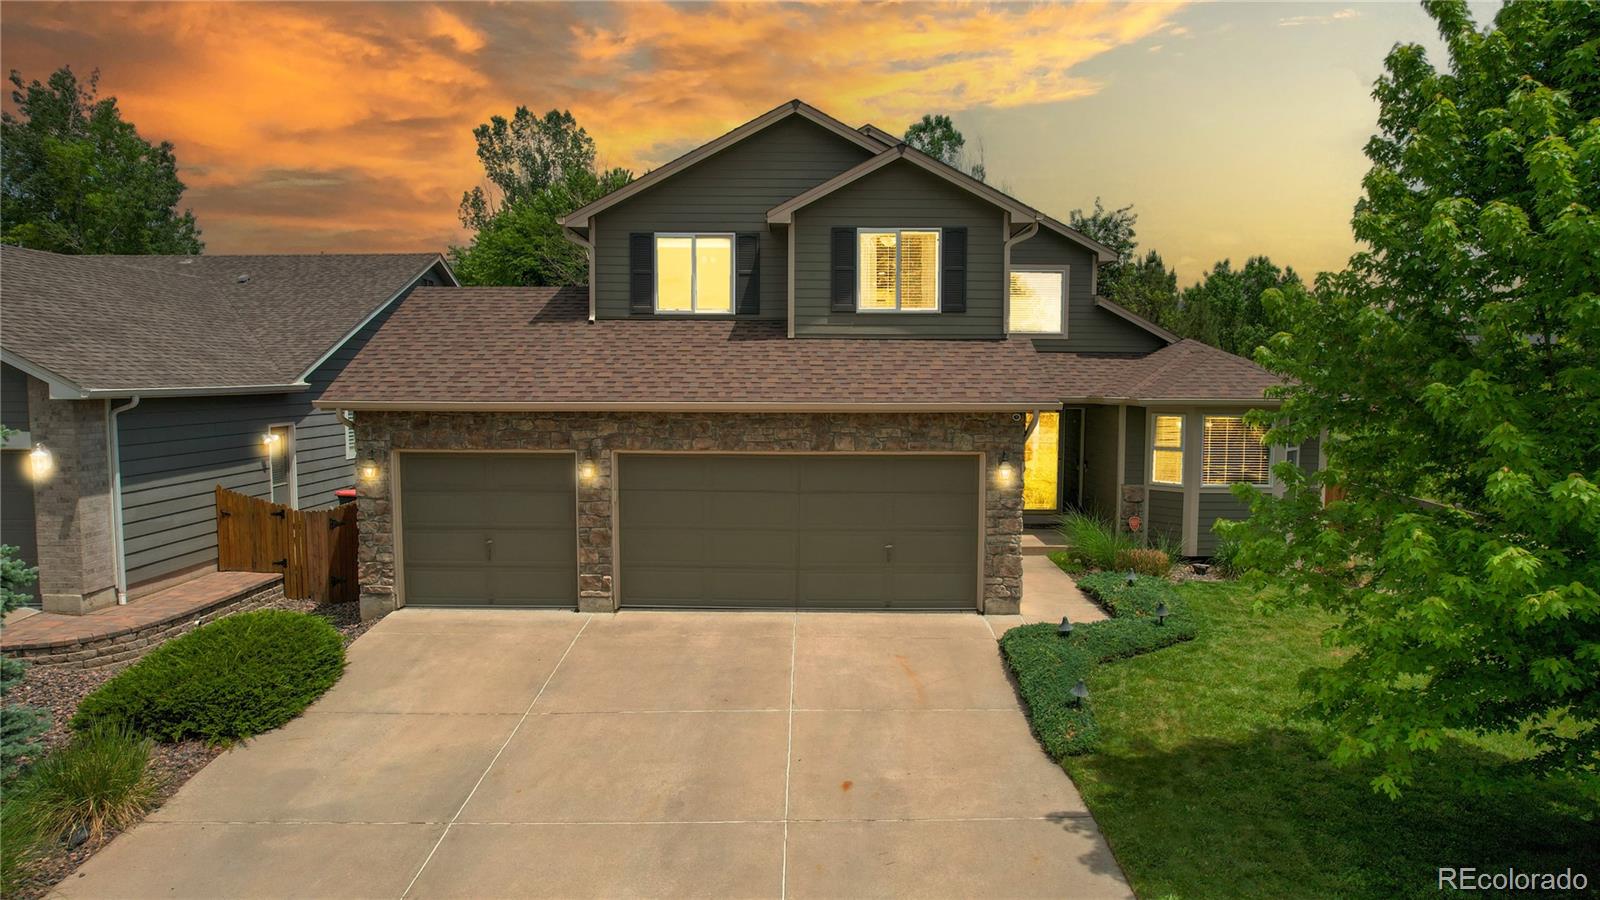 Report Image for 1379  Holden Court,Erie, Colorado